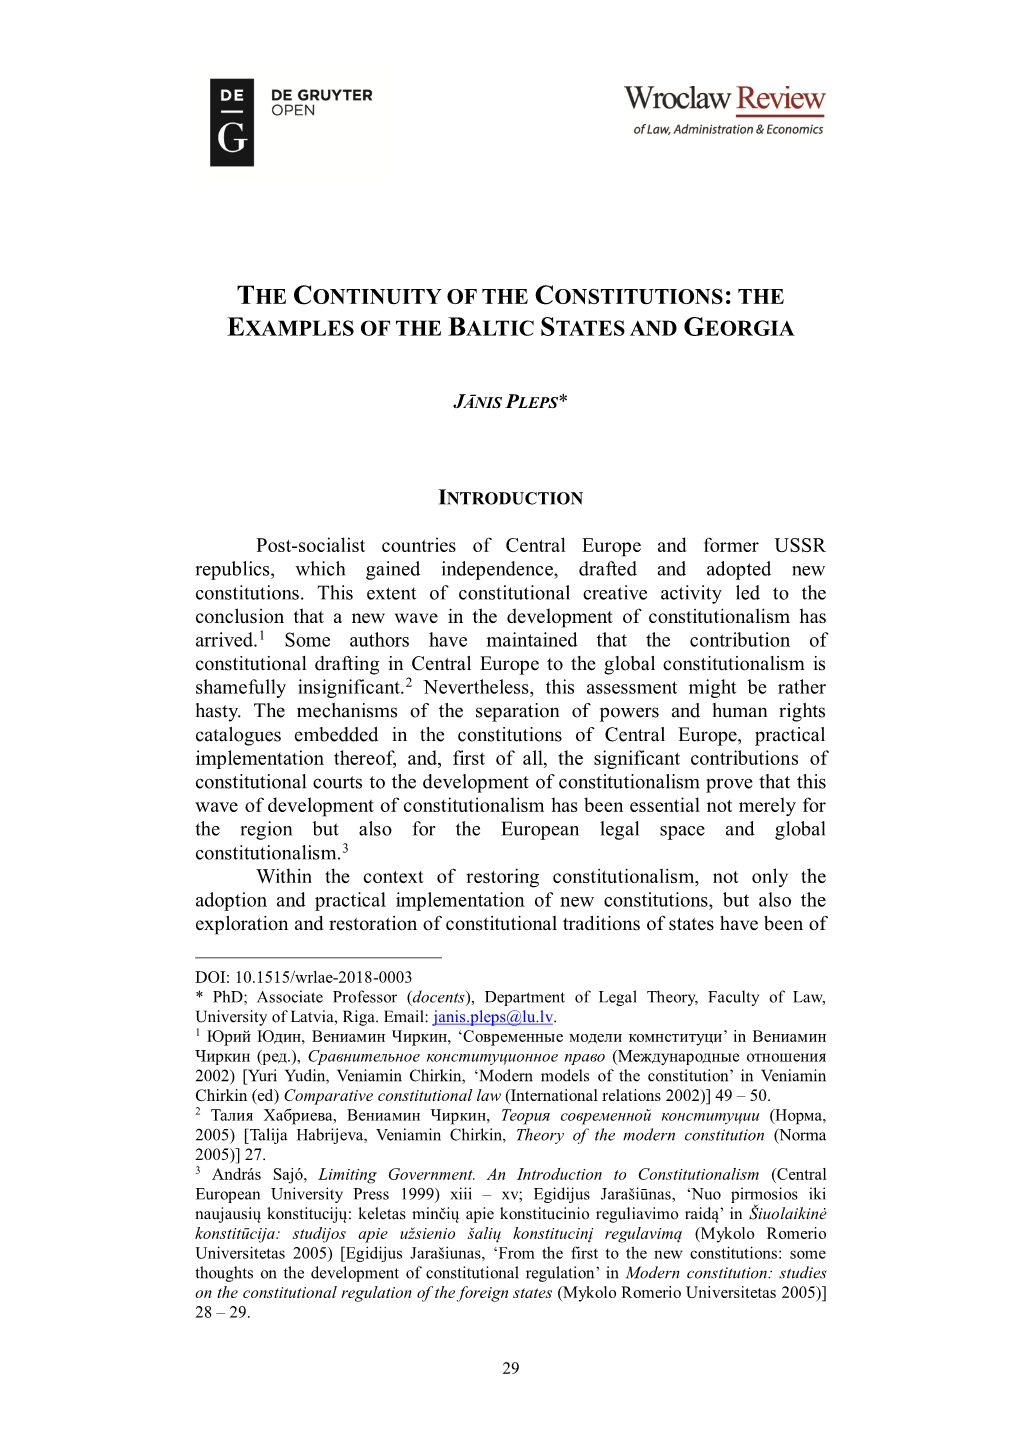 The Continuity of the Constitutions:The Examples of the Baltic States and Georgia